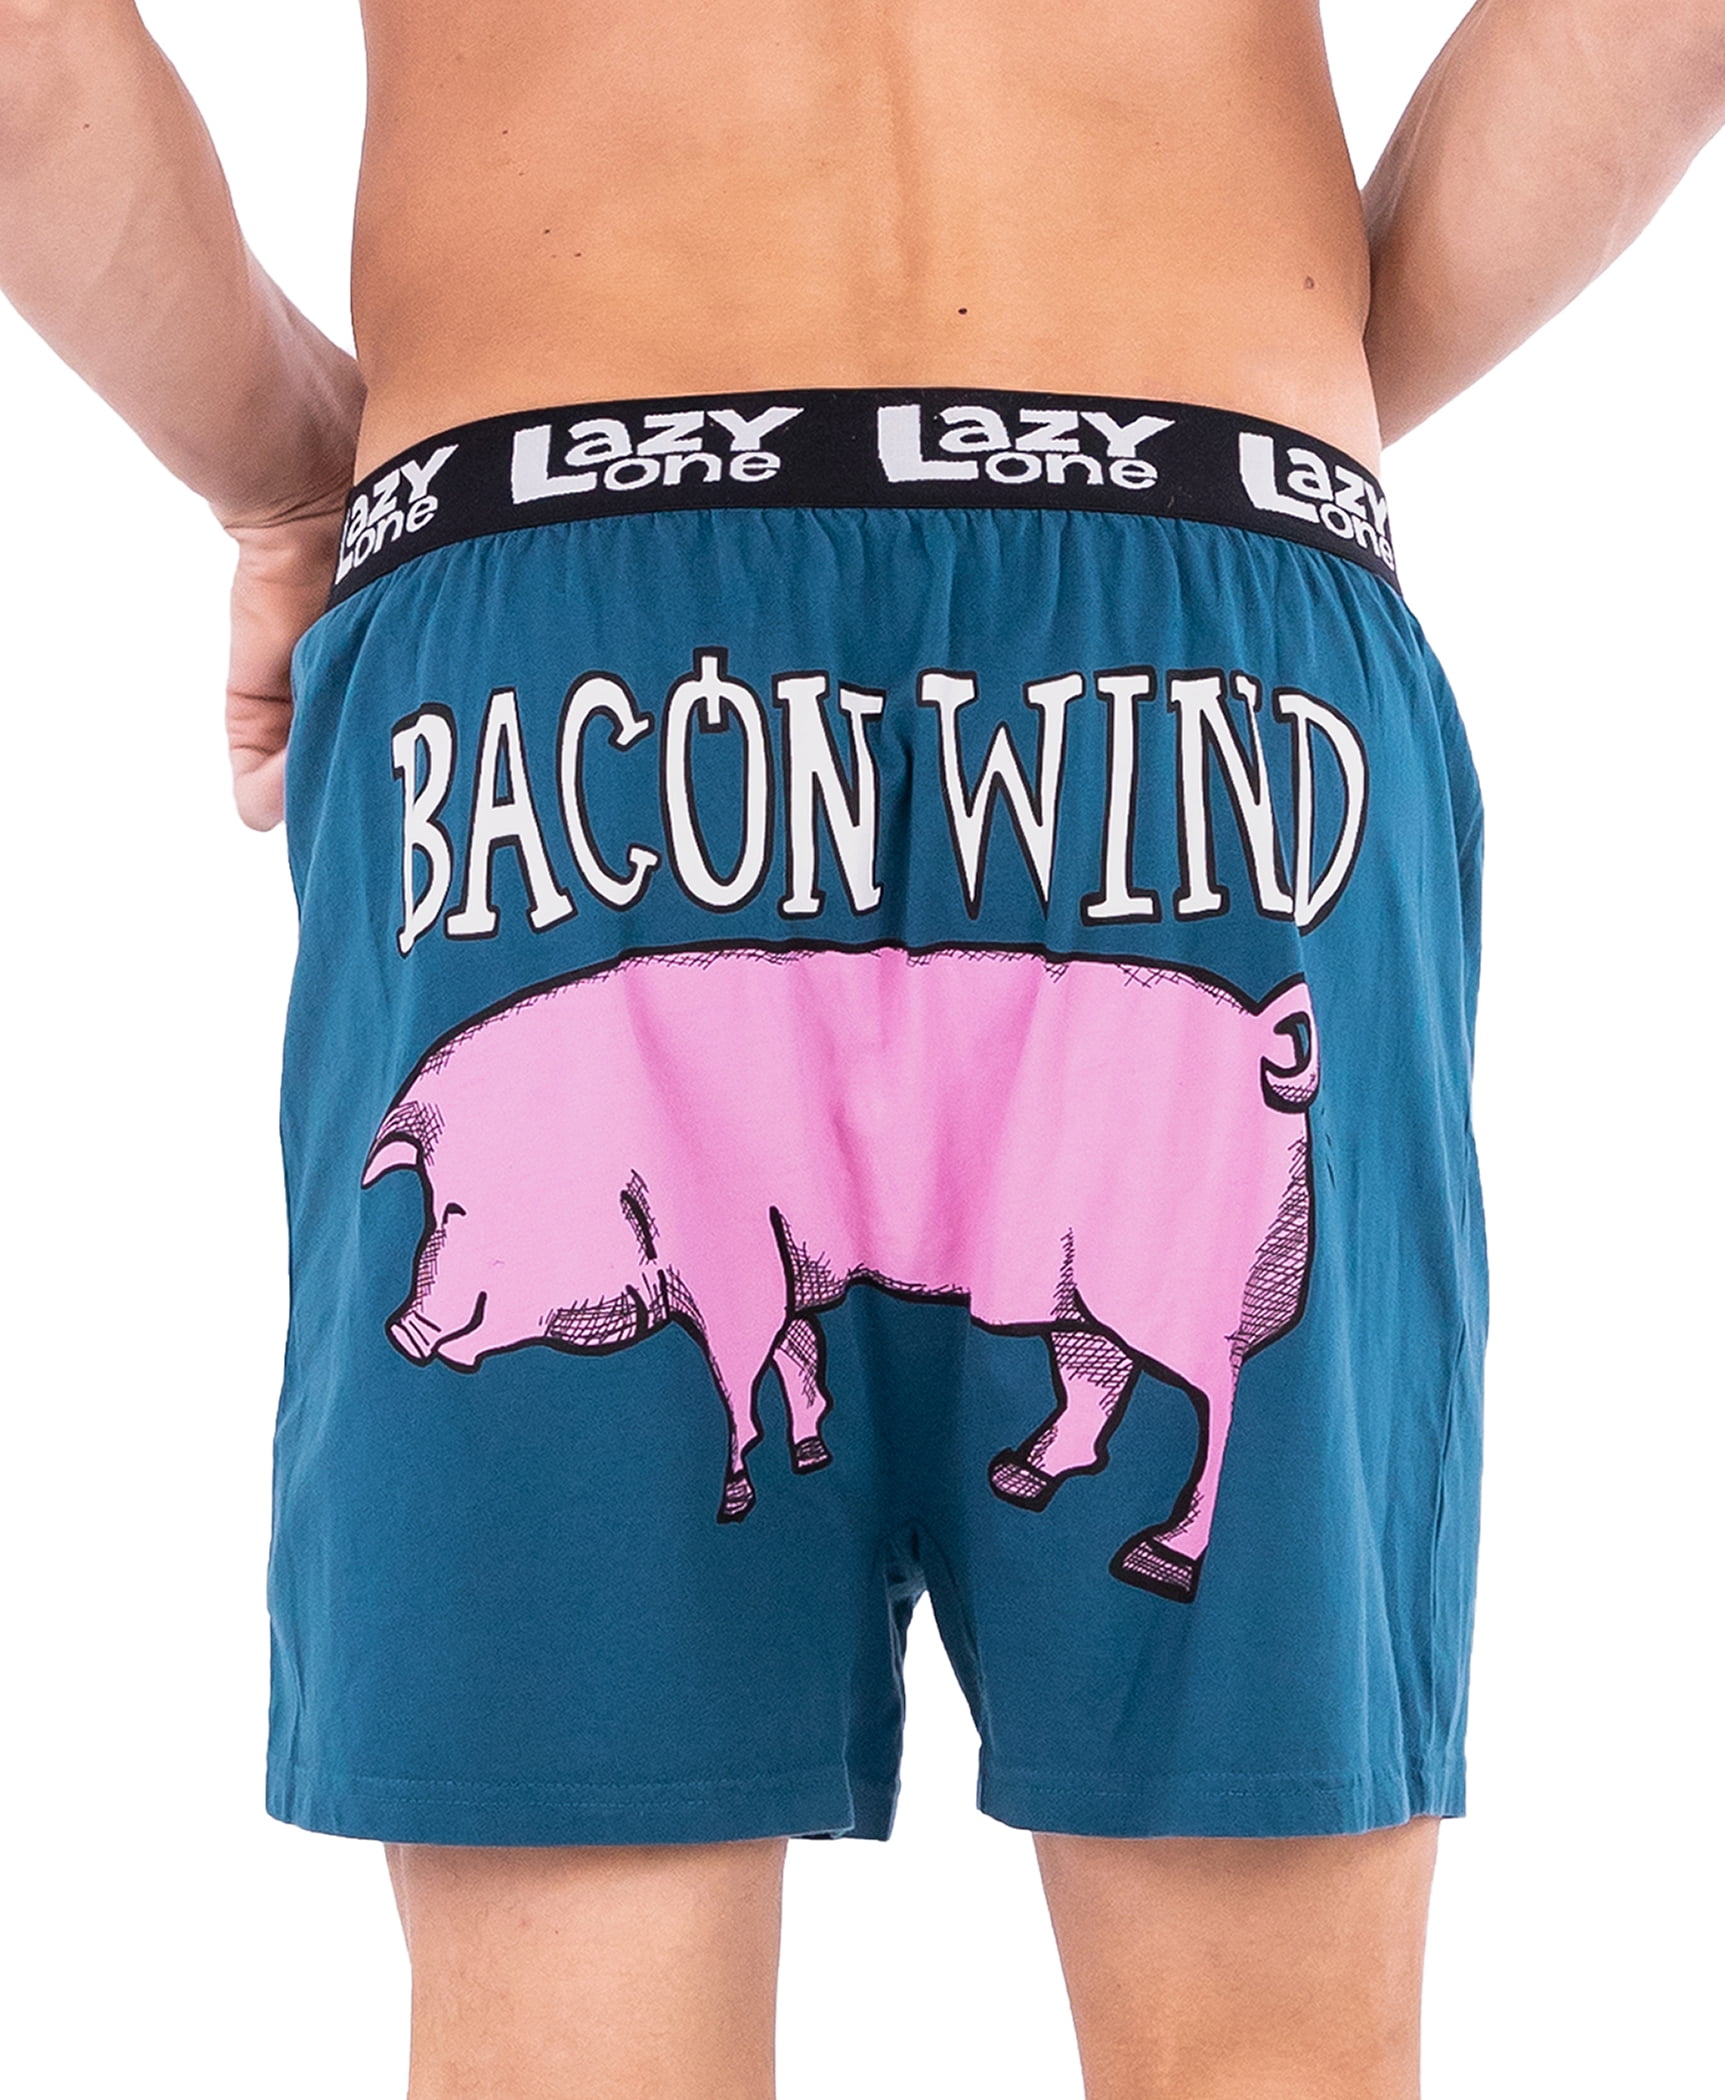 LazyOne Funny Animal Boxers, Bed Hog, Humorous Underwear, Gag Gifts for Men  (Large)